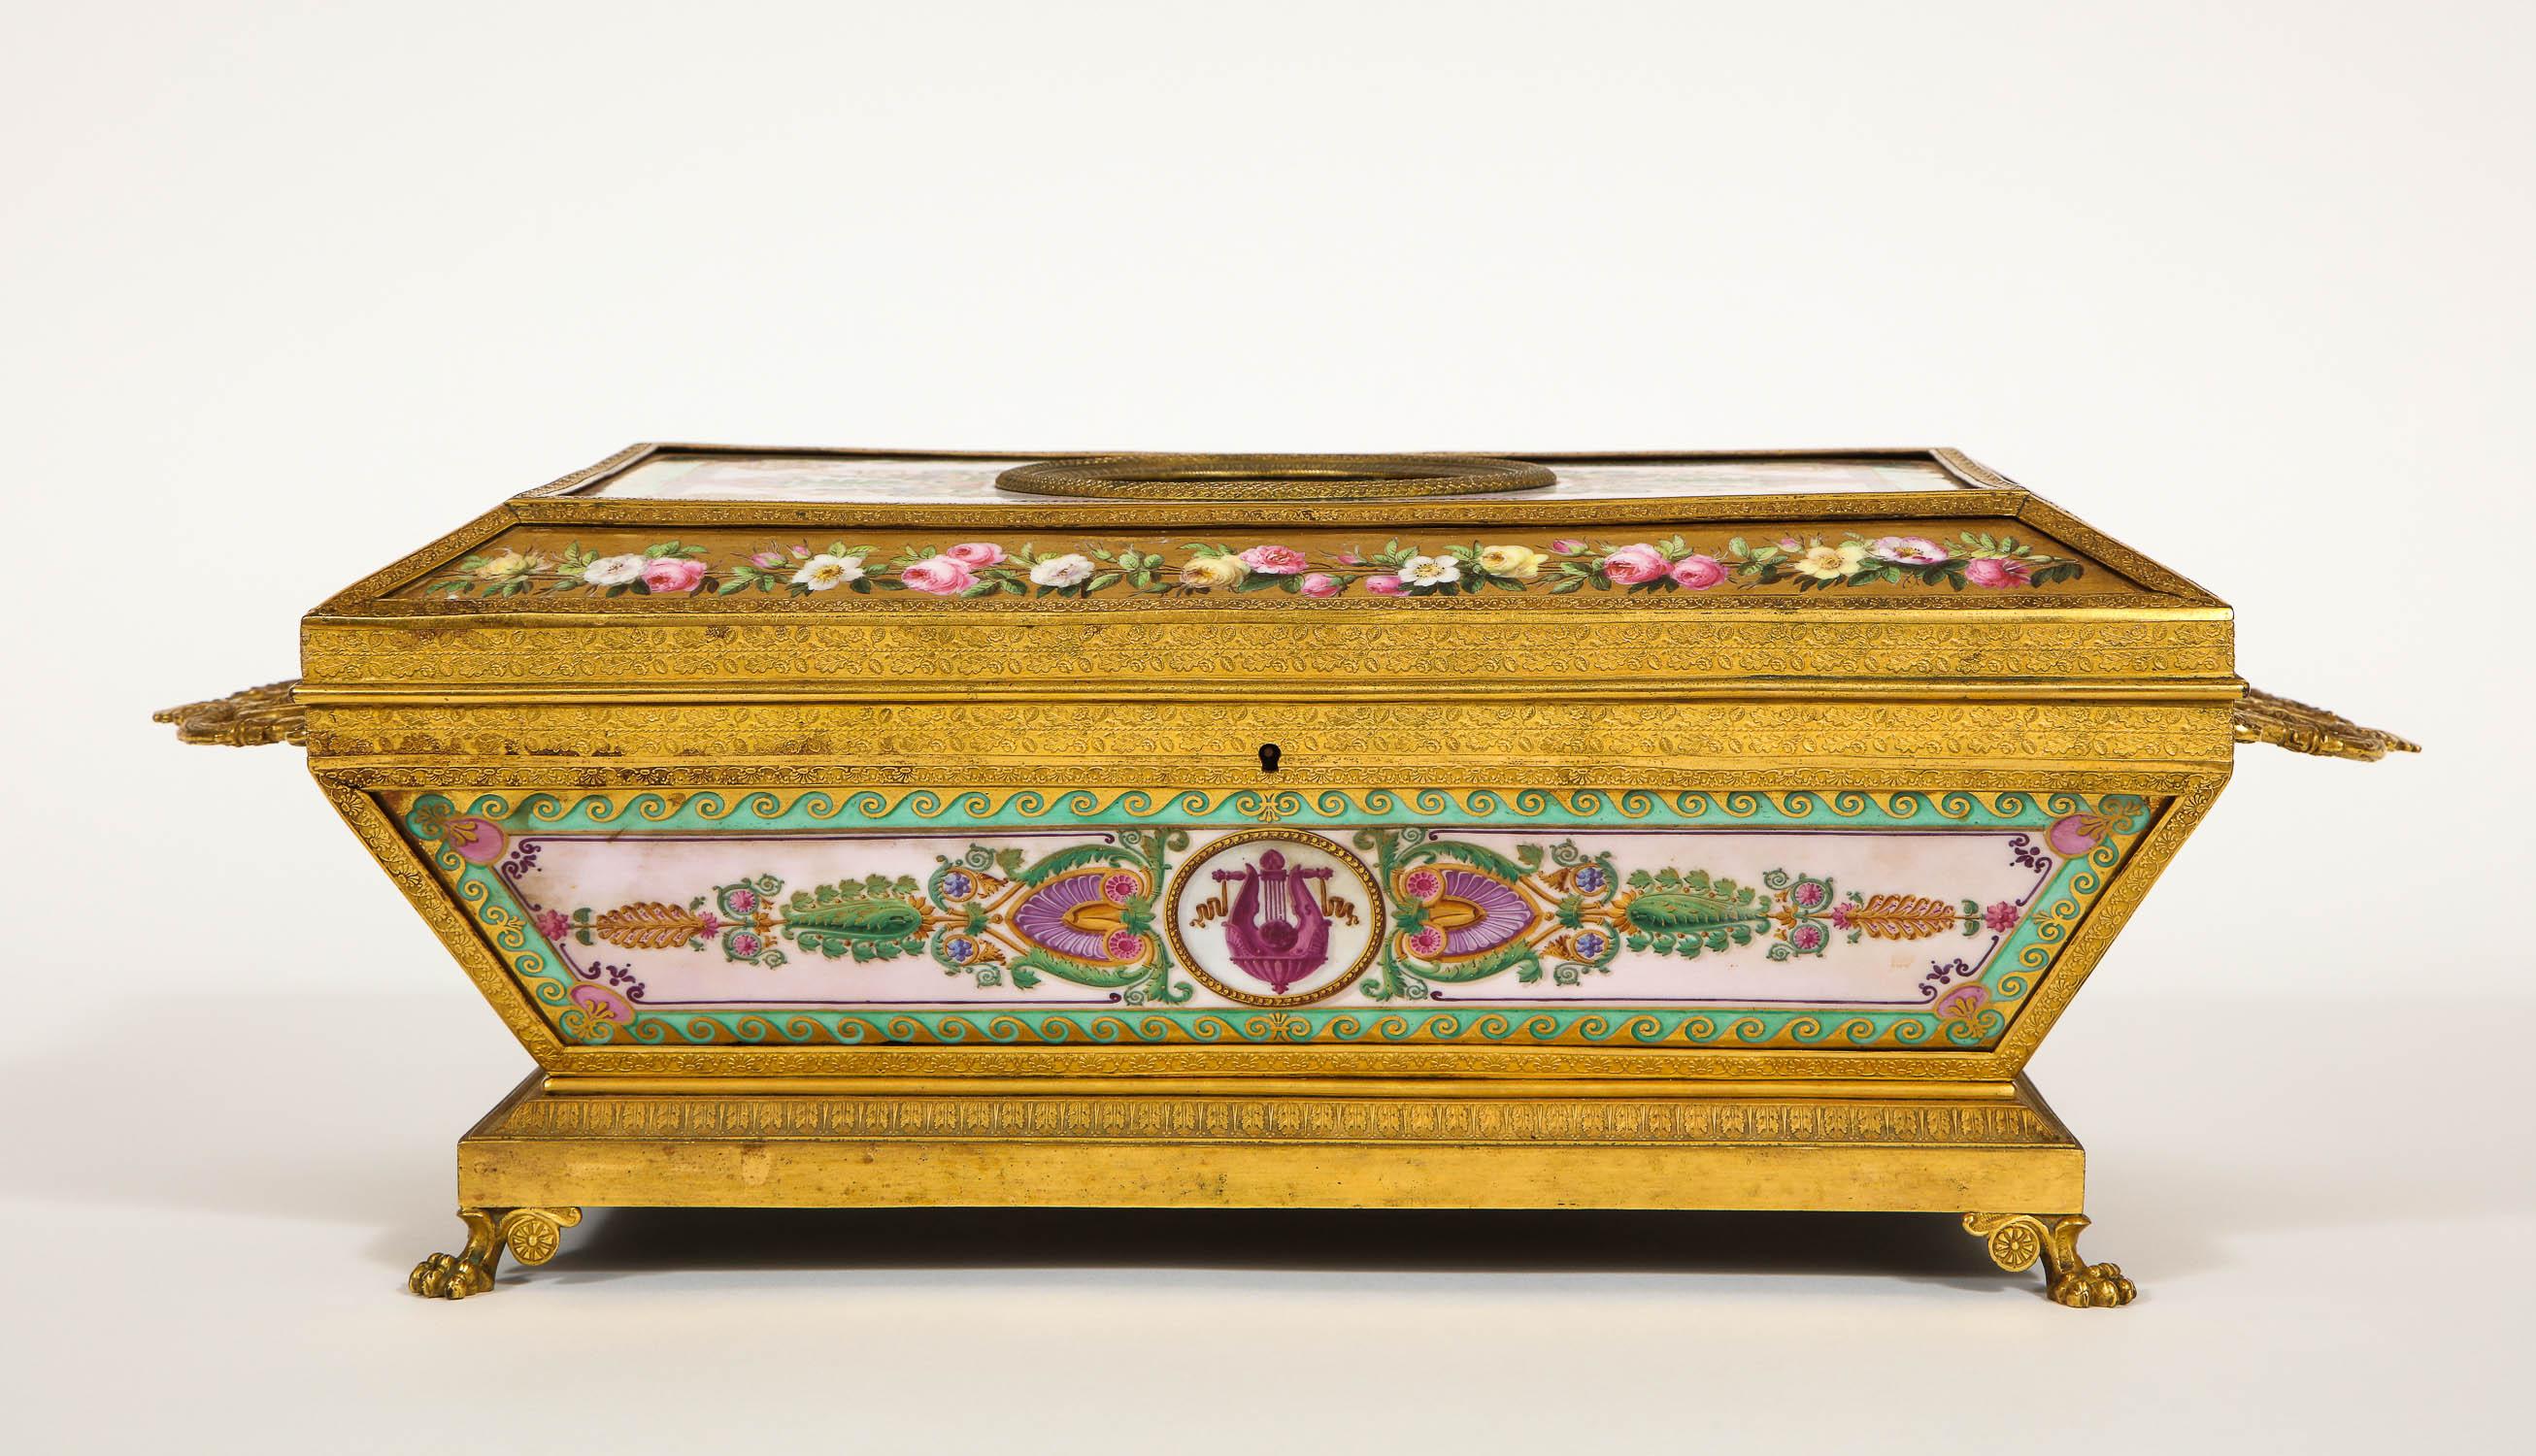 An Important and very rare Empire period Paris porcelain ormolu-mounted Empire rectangular shaped two-handled casket decorated and assembled by Feuillet or Sèvres Porcelain manufactures. The cover inset with a simulated hard stone cameo of Ceres in